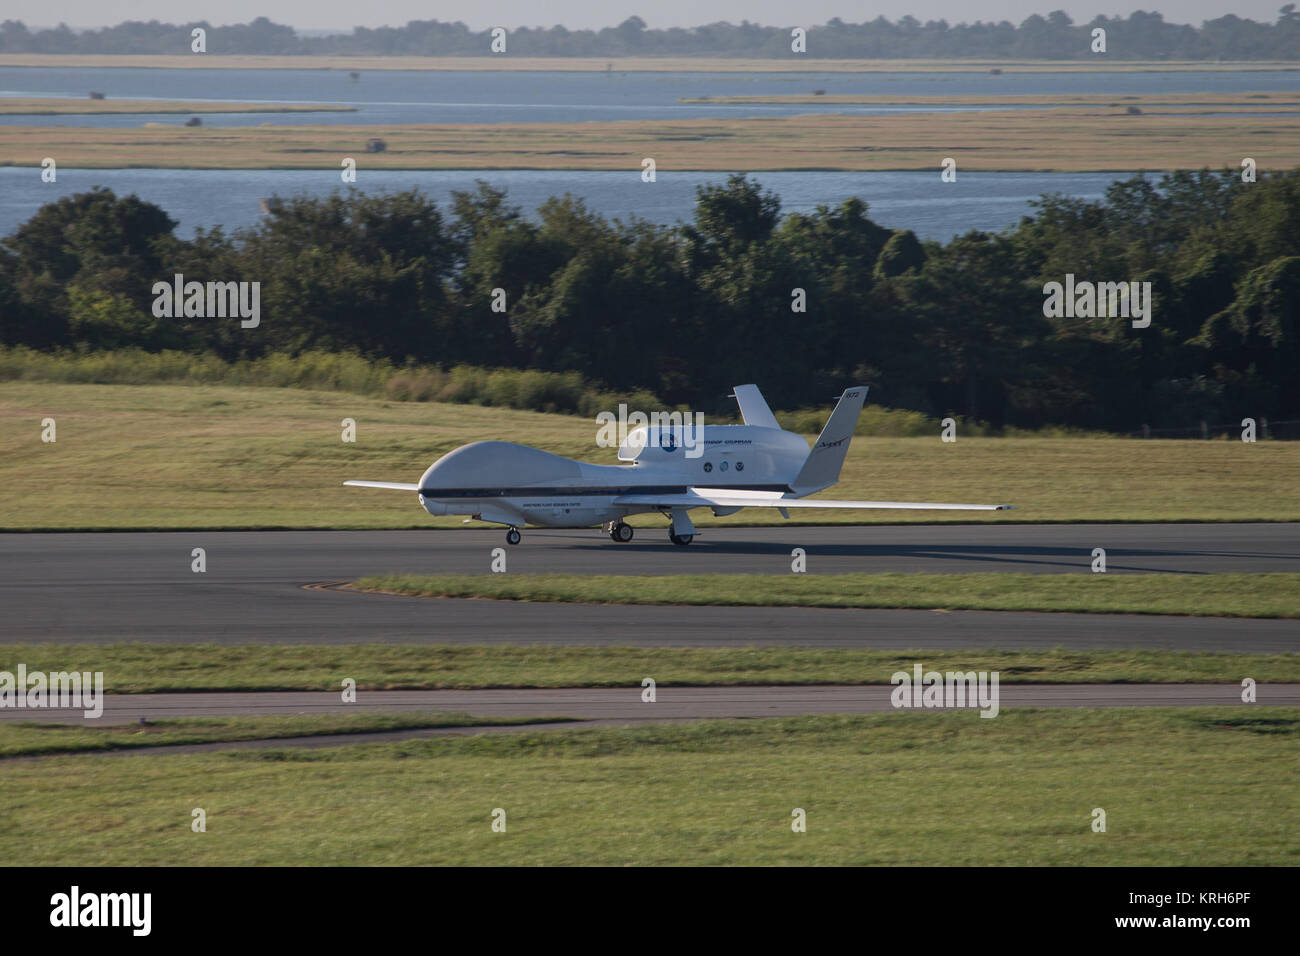 NASA's 2014 HS3 Hurricane Mission Begins: Global Hawk Lands at Wallops   The NASA Global Hawk 872 lands at 7:43 a.m. EDT, August 27, at the Wallops Flight Facility in Virginia following a 22-hour transit flight from its home base at the Armstrong Flight Research Center in California.  During the transit, the science instruments on the aircraft provided researchers data on Hurricane Cristobal in the Atlantic Ocean of the southeastern coast of the United States.  The aircraft is one of two NASA Global Hawks supporting the Hurricane and Severe Storm Sentinel (HS3) mission through September.  Cred Stock Photo